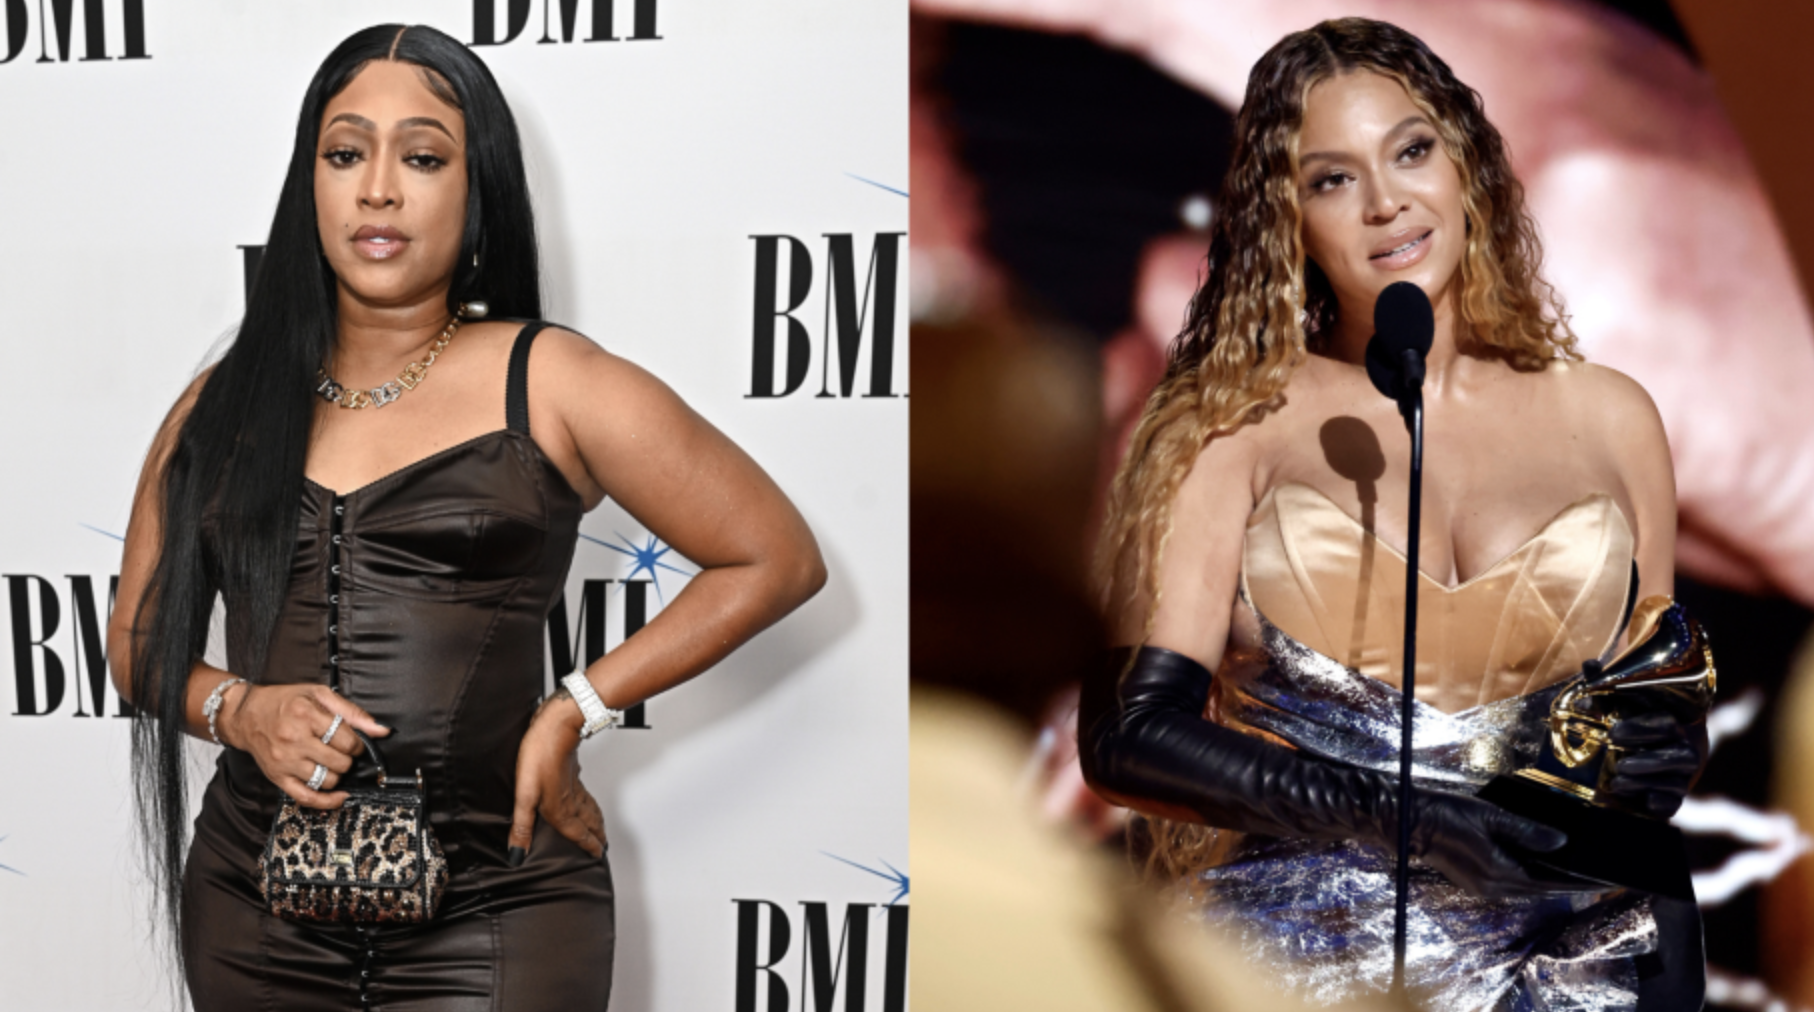 Trina labels Beyonce as the top female rapper and credits her for paving the path for the next generation in the industry.